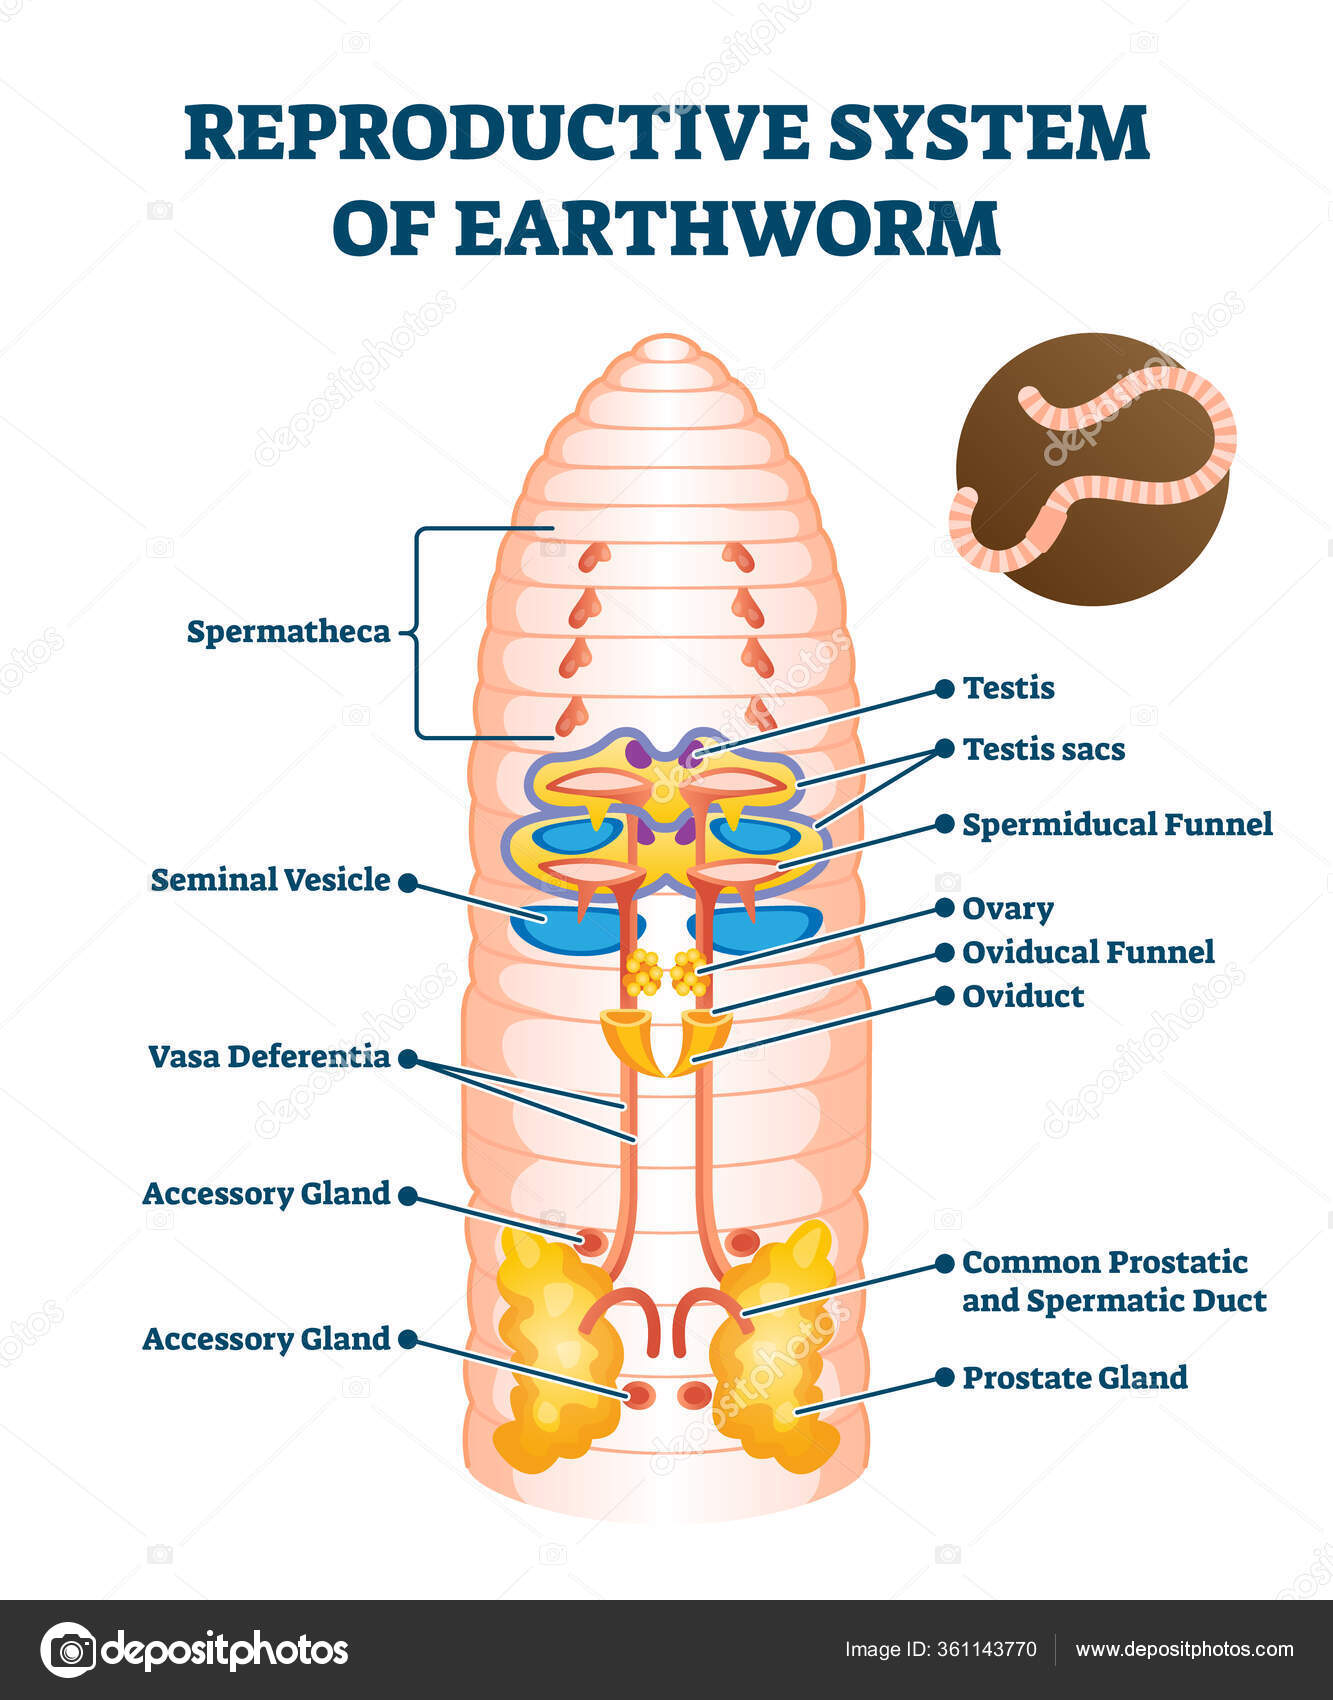 Reproductive system of anatomical earthworm labeled scheme vector